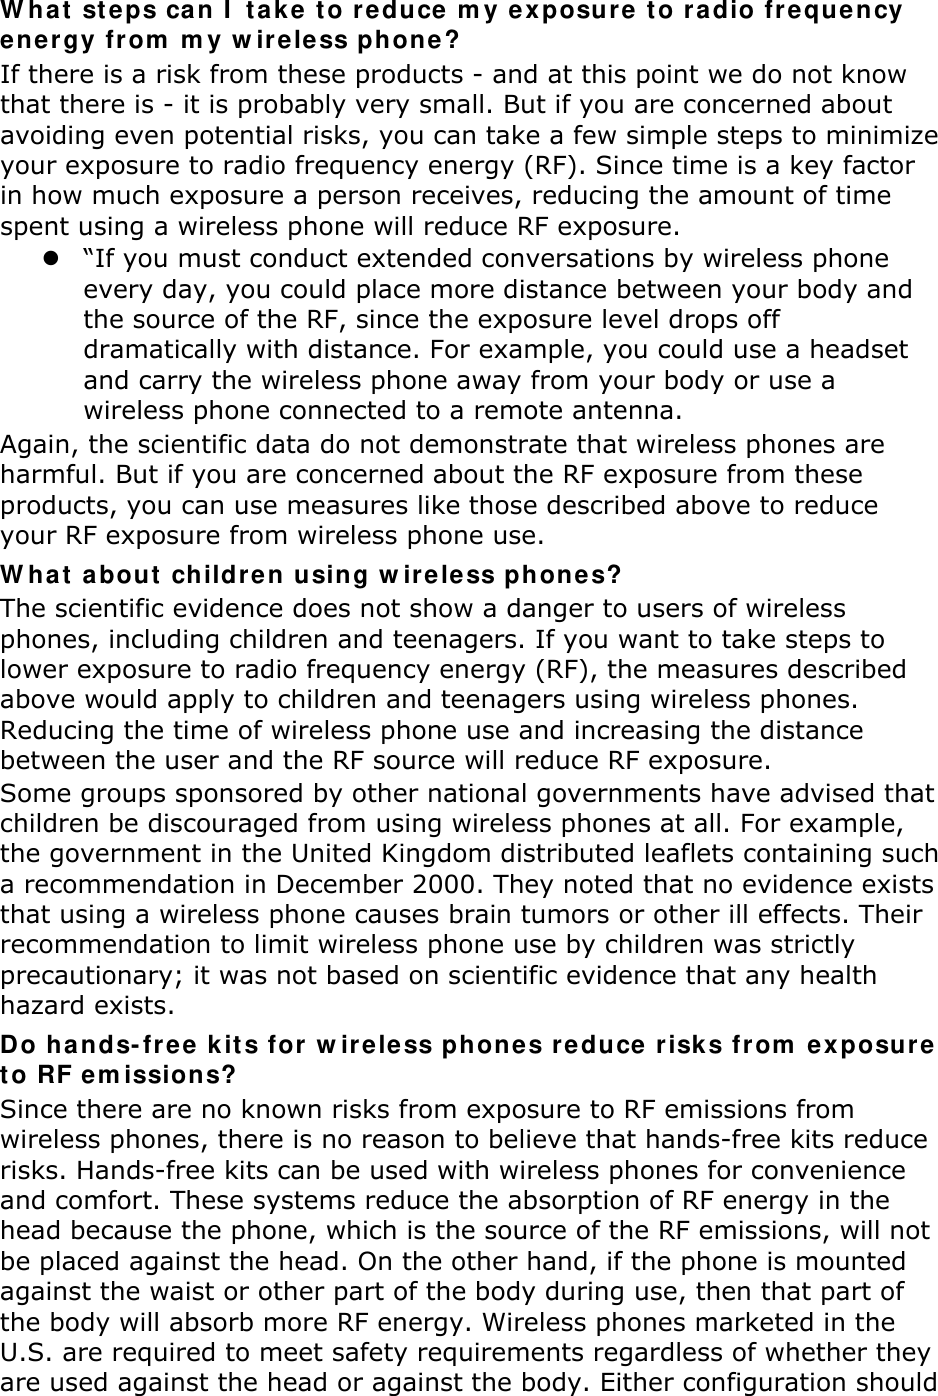 What steps can I take to reduce my exposure to radio frequency energy from my wireless phone? If there is a risk from these products - and at this point we do not know that there is - it is probably very small. But if you are concerned about avoiding even potential risks, you can take a few simple steps to minimize your exposure to radio frequency energy (RF). Since time is a key factor in how much exposure a person receives, reducing the amount of time spent using a wireless phone will reduce RF exposure. z “If you must conduct extended conversations by wireless phone every day, you could place more distance between your body and the source of the RF, since the exposure level drops off dramatically with distance. For example, you could use a headset and carry the wireless phone away from your body or use a wireless phone connected to a remote antenna. Again, the scientific data do not demonstrate that wireless phones are harmful. But if you are concerned about the RF exposure from these products, you can use measures like those described above to reduce your RF exposure from wireless phone use. What about children using wireless phones? The scientific evidence does not show a danger to users of wireless phones, including children and teenagers. If you want to take steps to lower exposure to radio frequency energy (RF), the measures described above would apply to children and teenagers using wireless phones. Reducing the time of wireless phone use and increasing the distance between the user and the RF source will reduce RF exposure. Some groups sponsored by other national governments have advised that children be discouraged from using wireless phones at all. For example, the government in the United Kingdom distributed leaflets containing such a recommendation in December 2000. They noted that no evidence exists that using a wireless phone causes brain tumors or other ill effects. Their recommendation to limit wireless phone use by children was strictly precautionary; it was not based on scientific evidence that any health hazard exists.   Do hands-free kits for wireless phones reduce risks from exposure to RF emissions? Since there are no known risks from exposure to RF emissions from wireless phones, there is no reason to believe that hands-free kits reduce risks. Hands-free kits can be used with wireless phones for convenience and comfort. These systems reduce the absorption of RF energy in the head because the phone, which is the source of the RF emissions, will not be placed against the head. On the other hand, if the phone is mounted against the waist or other part of the body during use, then that part of the body will absorb more RF energy. Wireless phones marketed in the U.S. are required to meet safety requirements regardless of whether they are used against the head or against the body. Either configuration should 